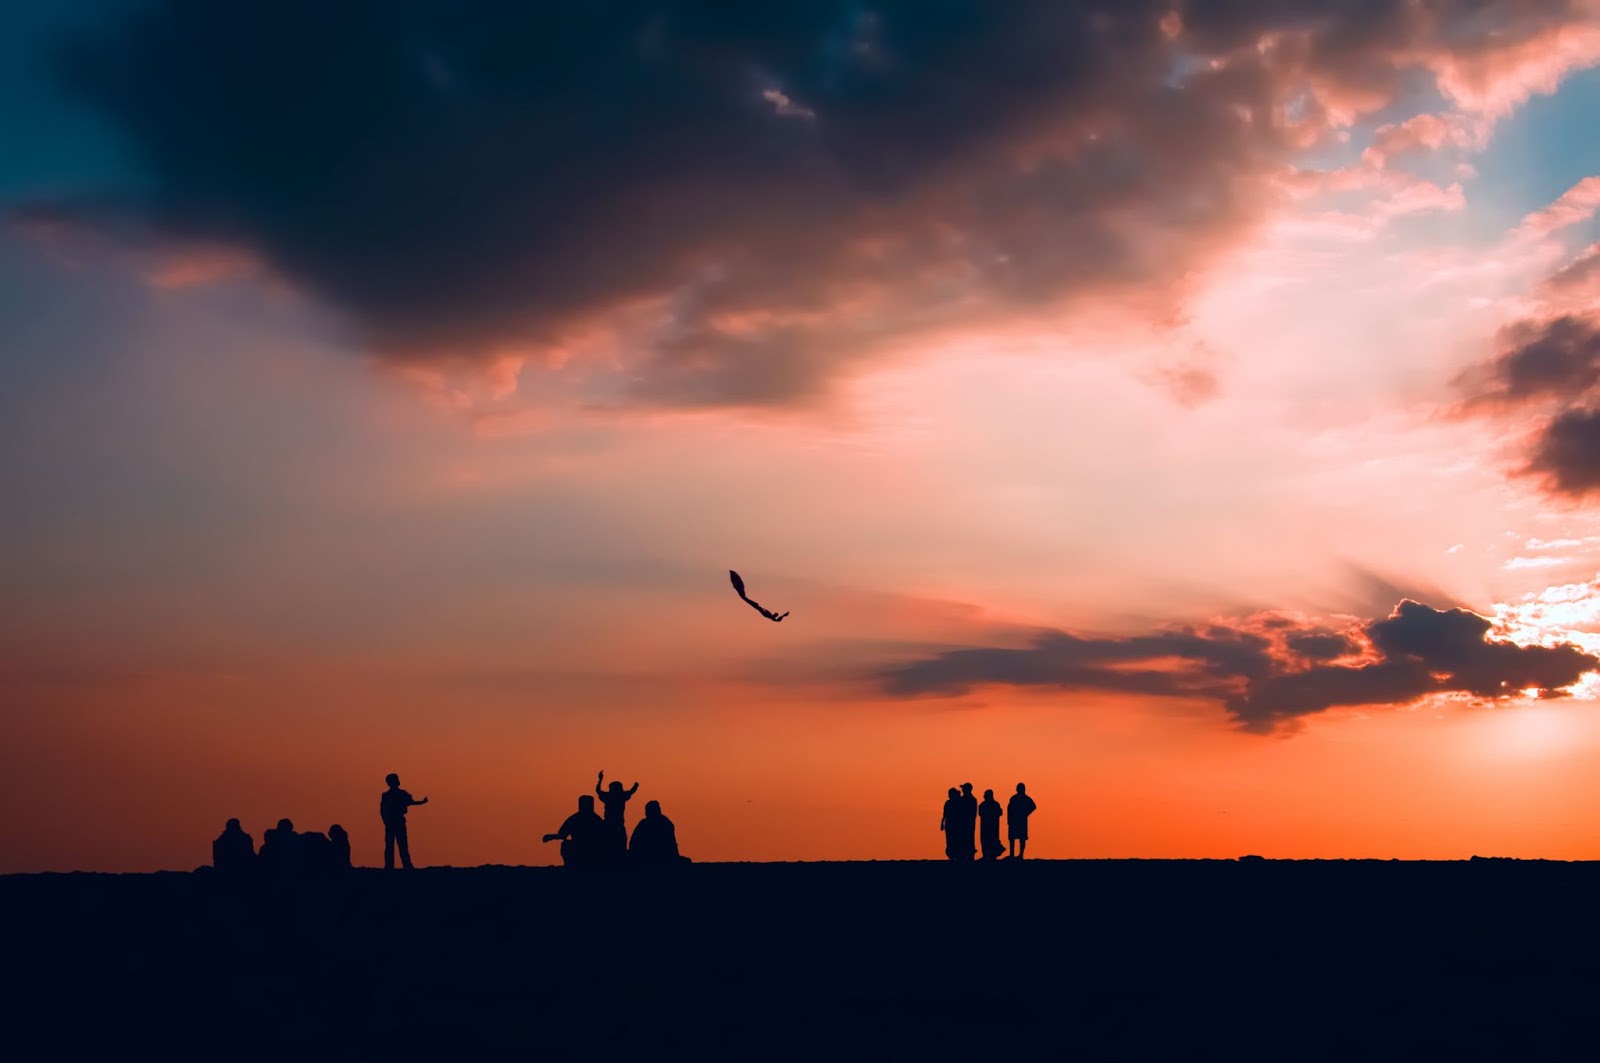 Silhouettes of people and kites after sunset